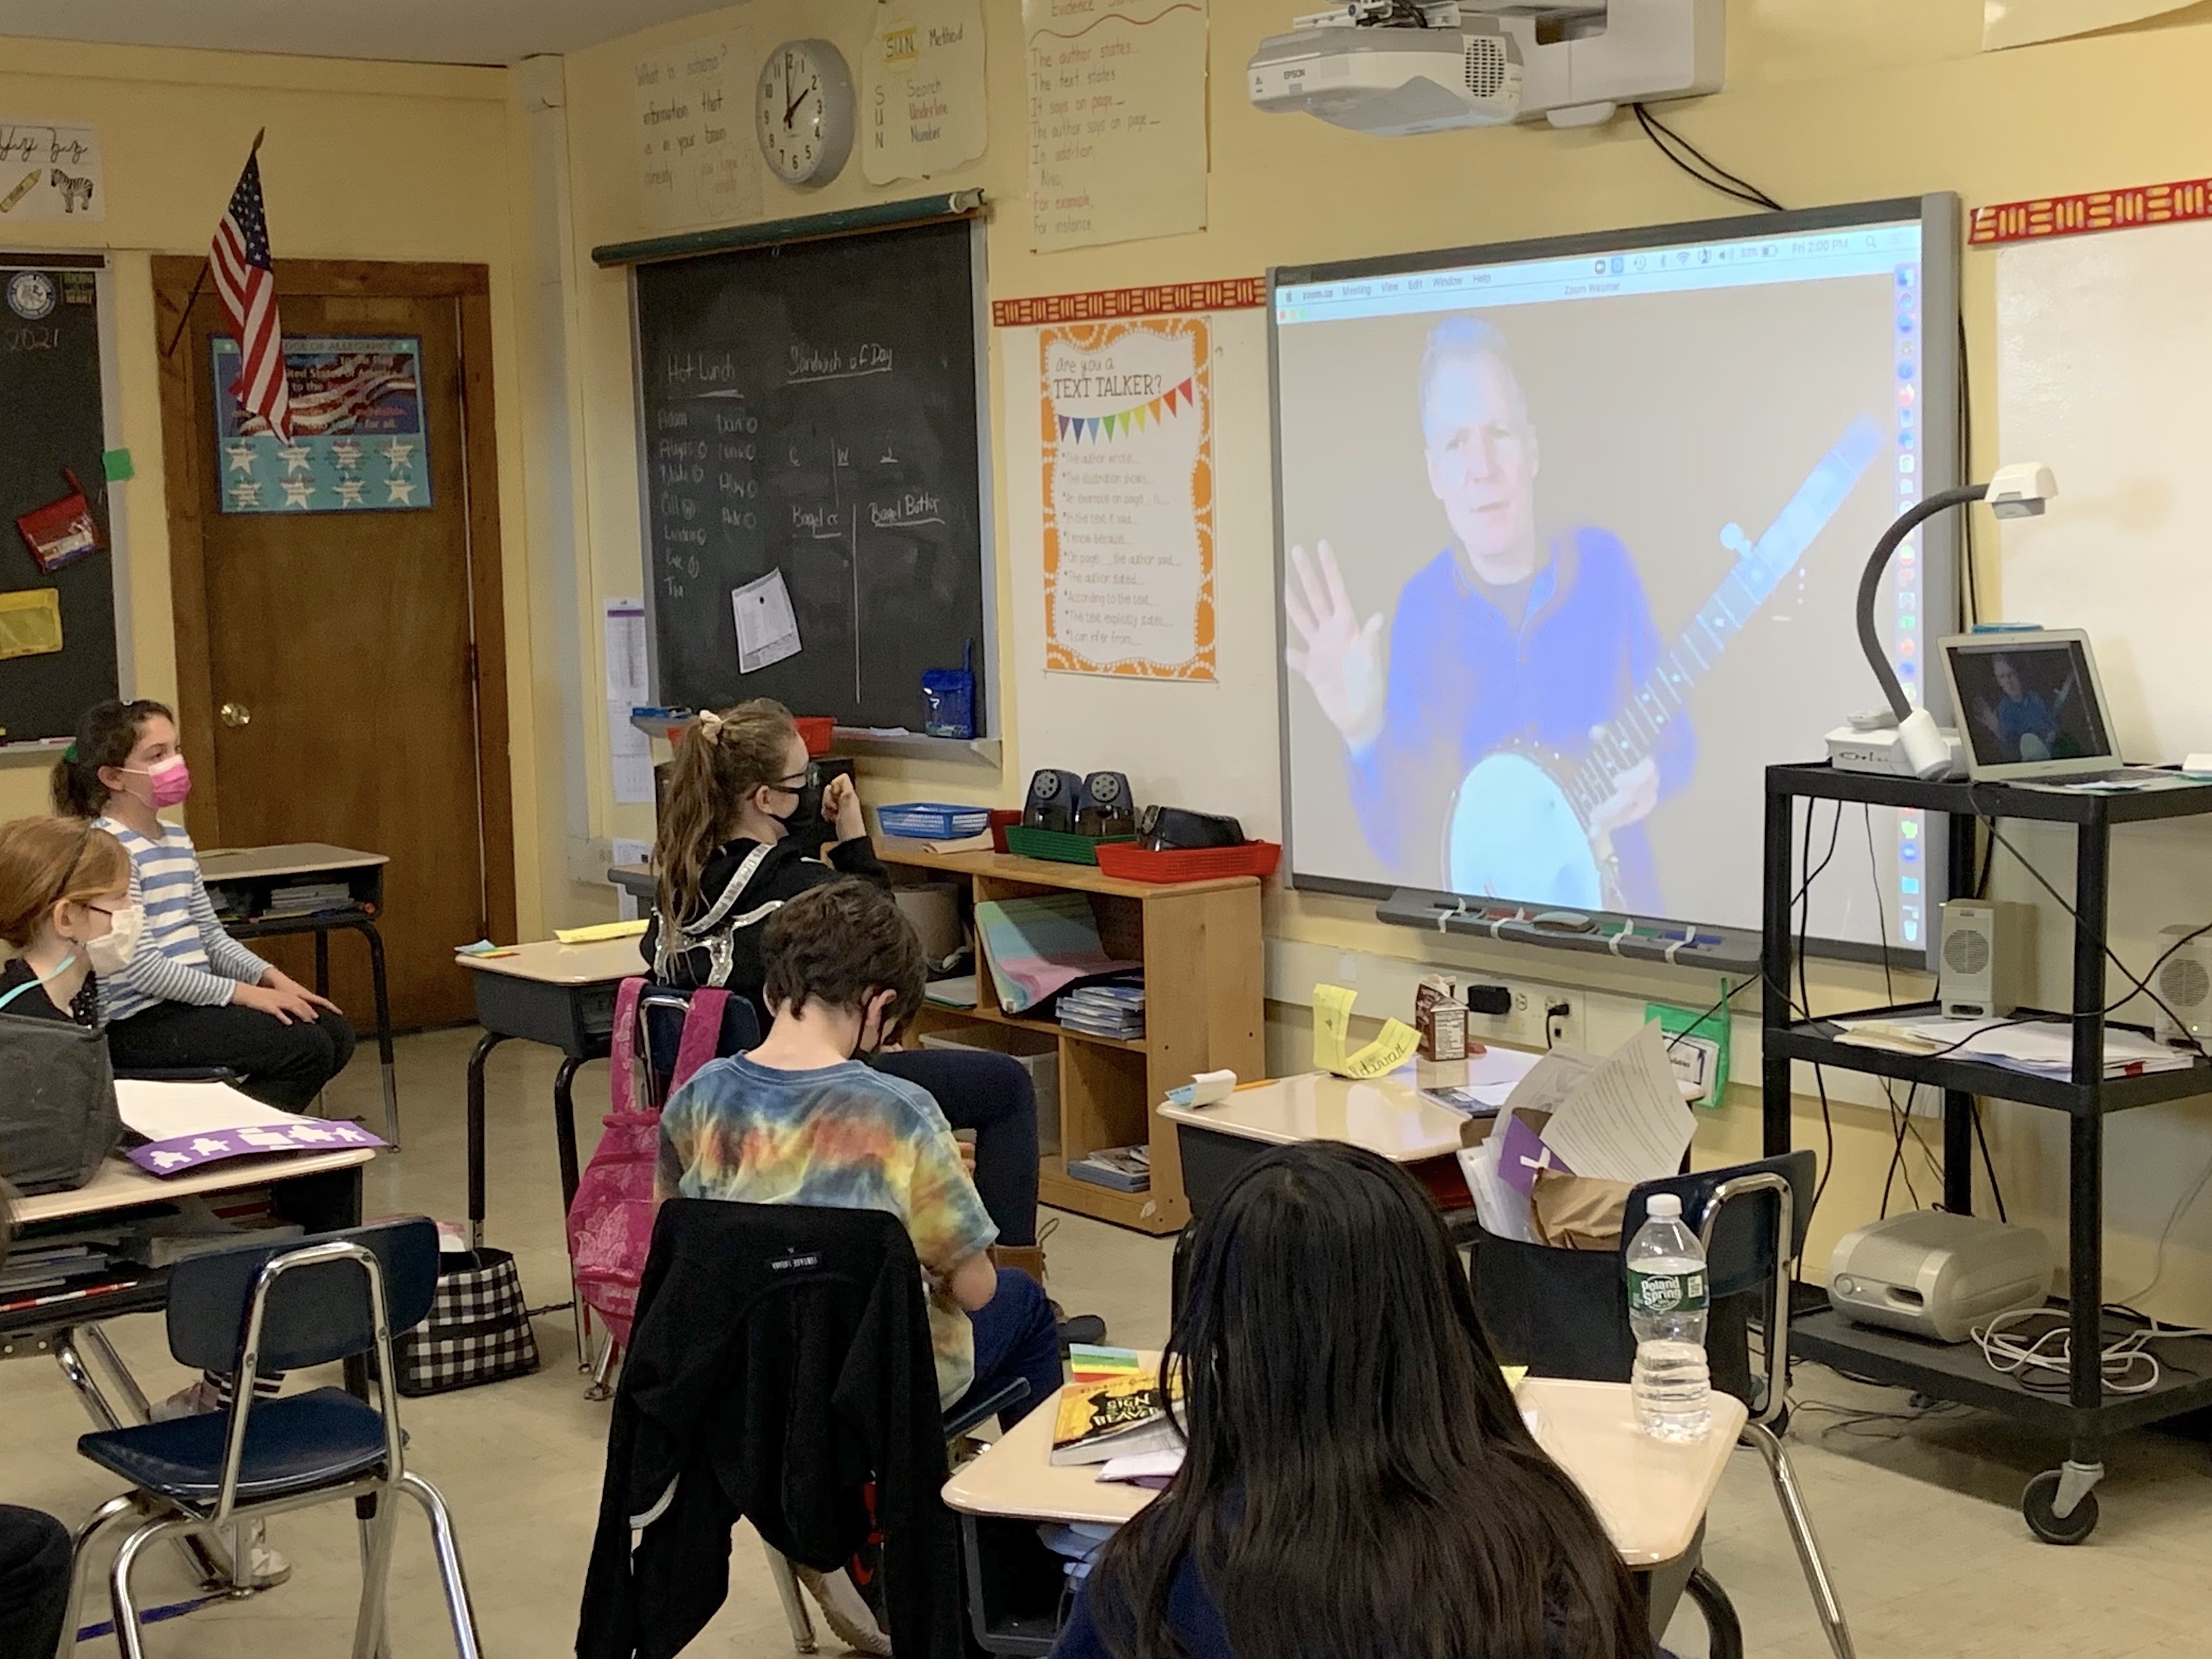 Thank you to our PTA Arts in Ed for providing all of our 4th Grade Classes with a curriculum-based, interactive virtual assembly today connecting History and Music! Our remote students participated along with our in-school learners in all of our 4th grade classes